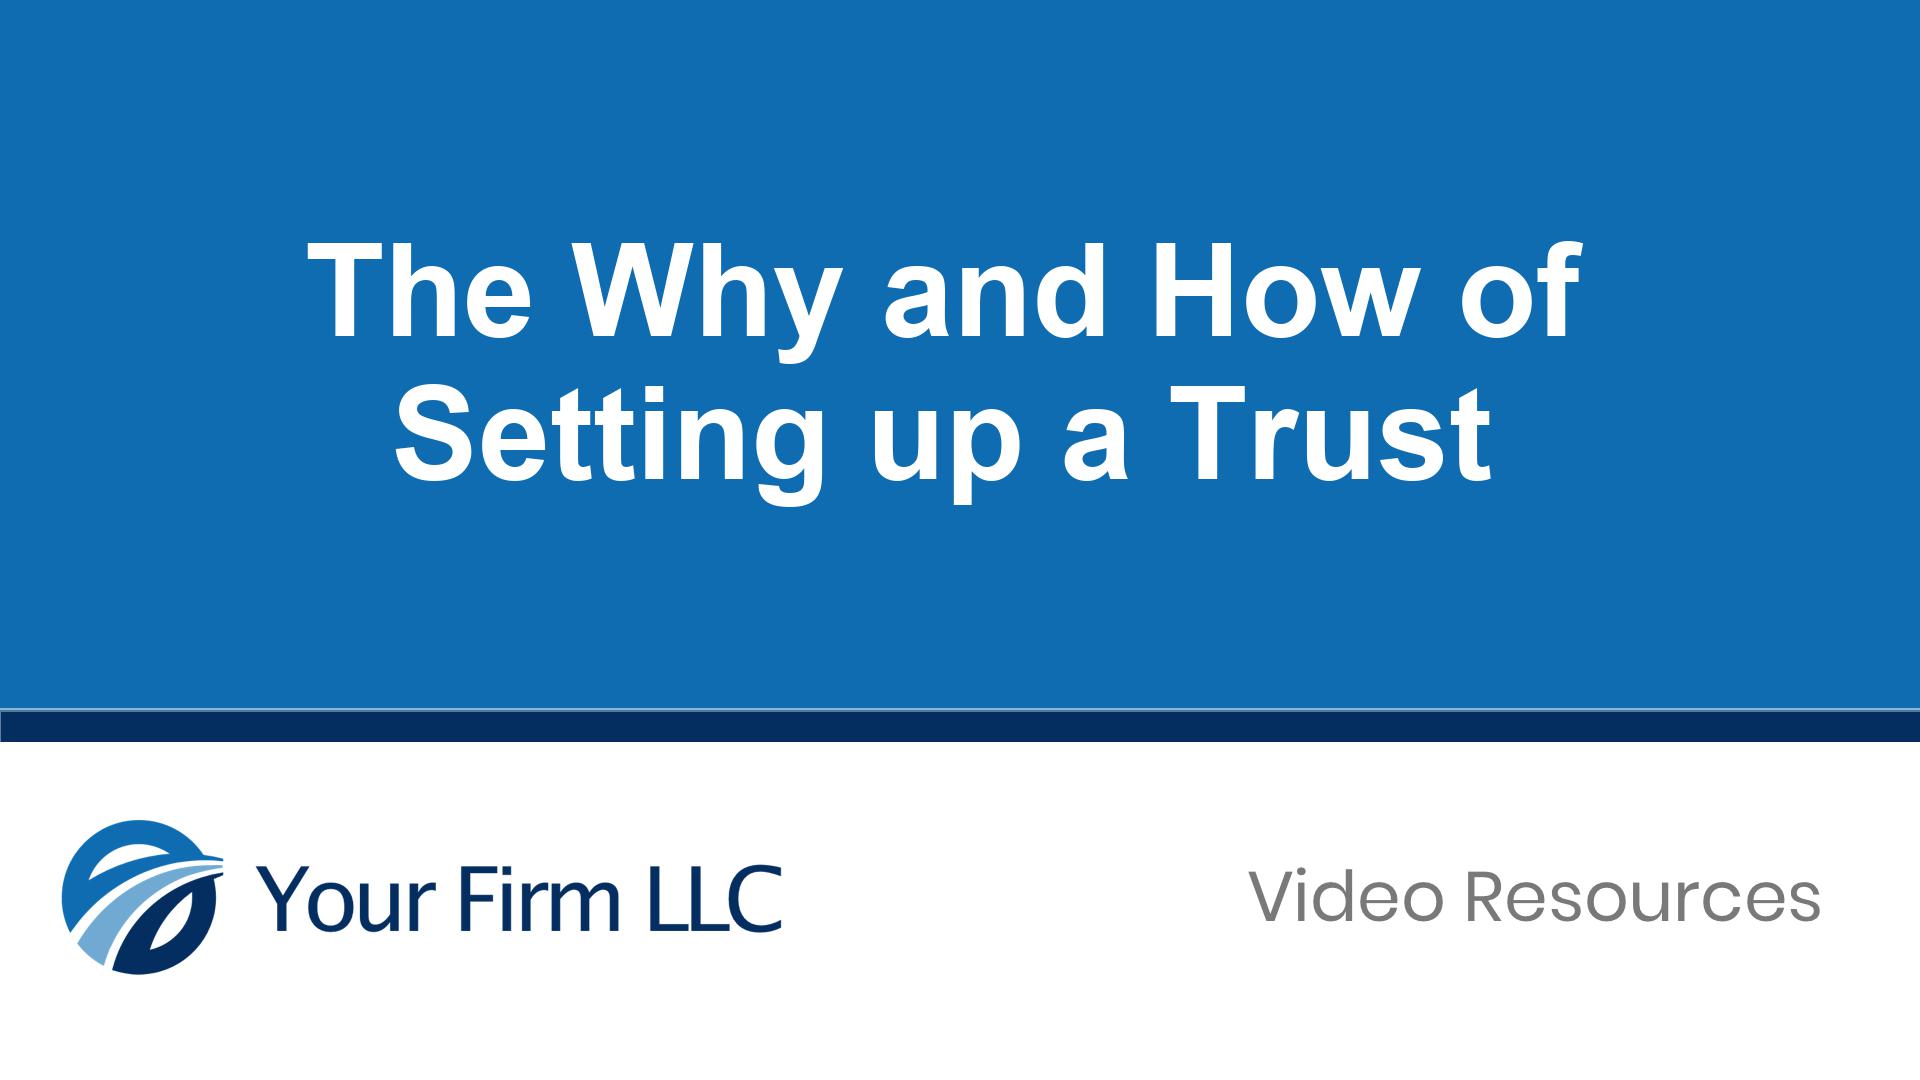 The Why and How of Setting up a Trust